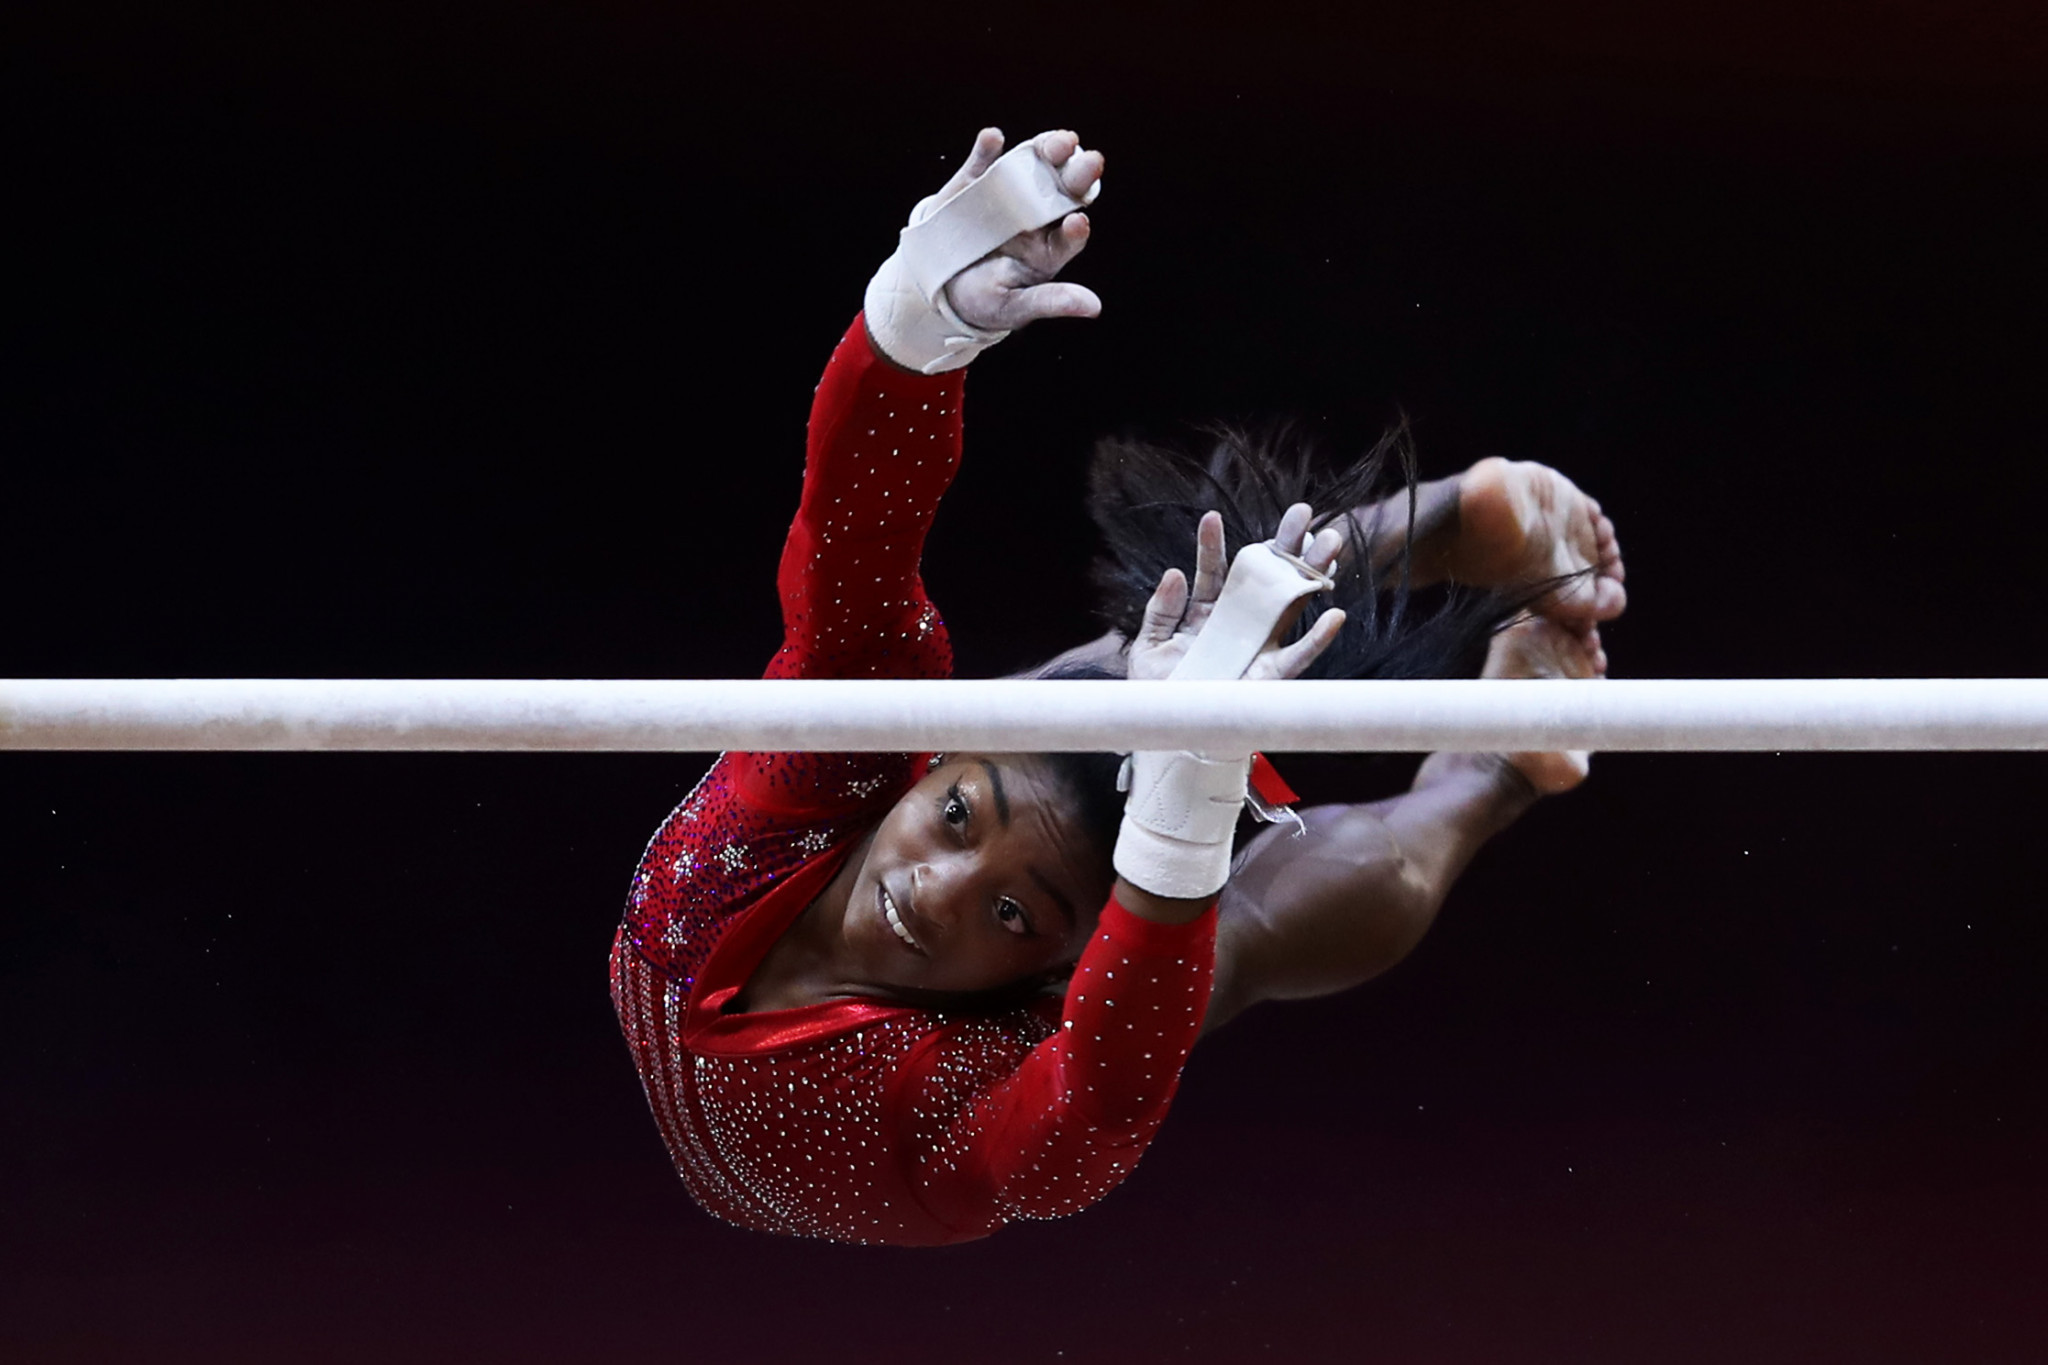 Biles spearheads United States to team title by huge margin at Artistic Gymnastics World Championships